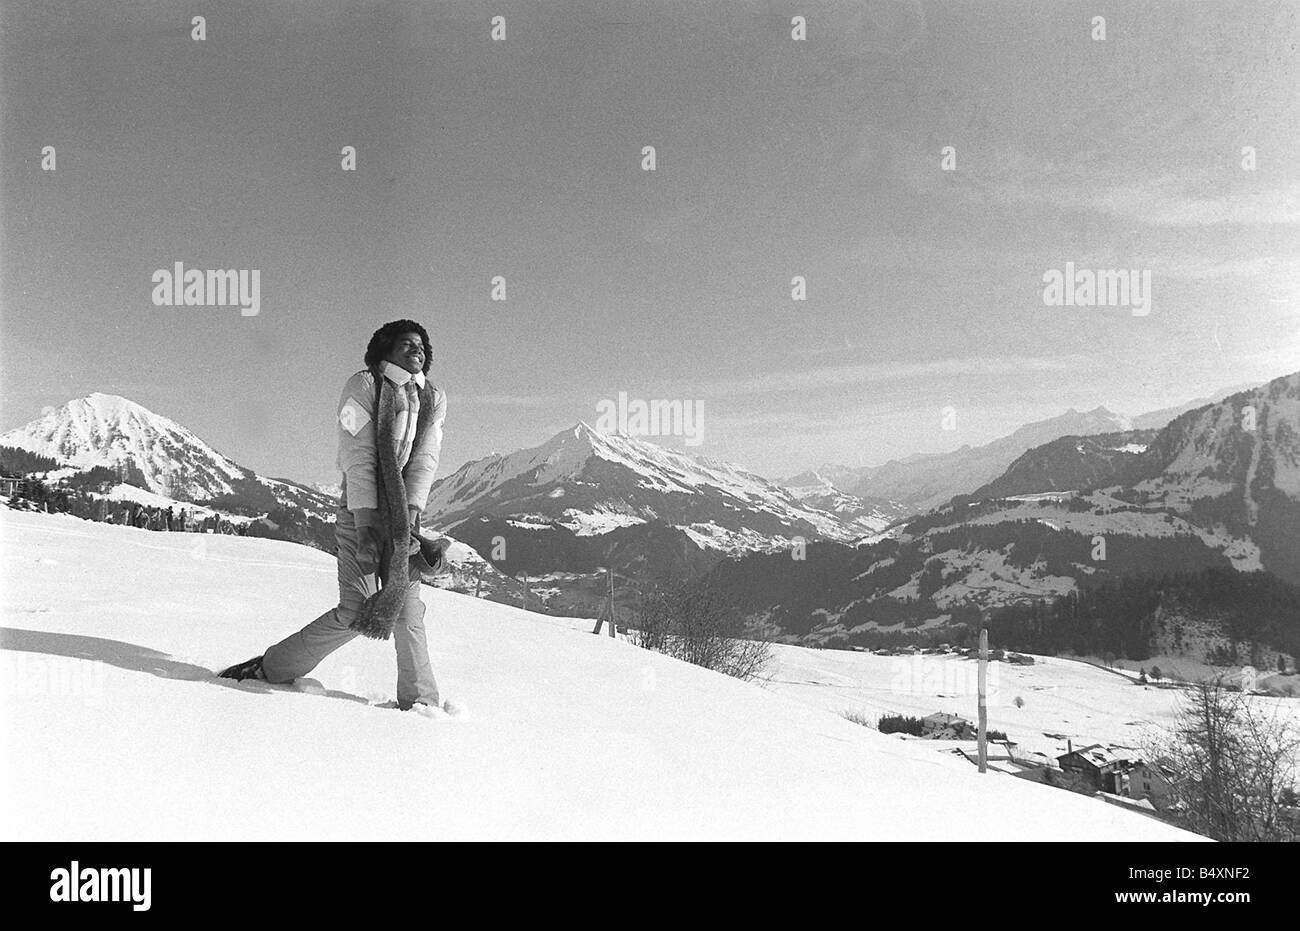 The Jackson 5 February 1979 Michael Jackson performing in Switzerland on  the slopes 24 2 1979 The Jackson Five Stock Photo - Alamy